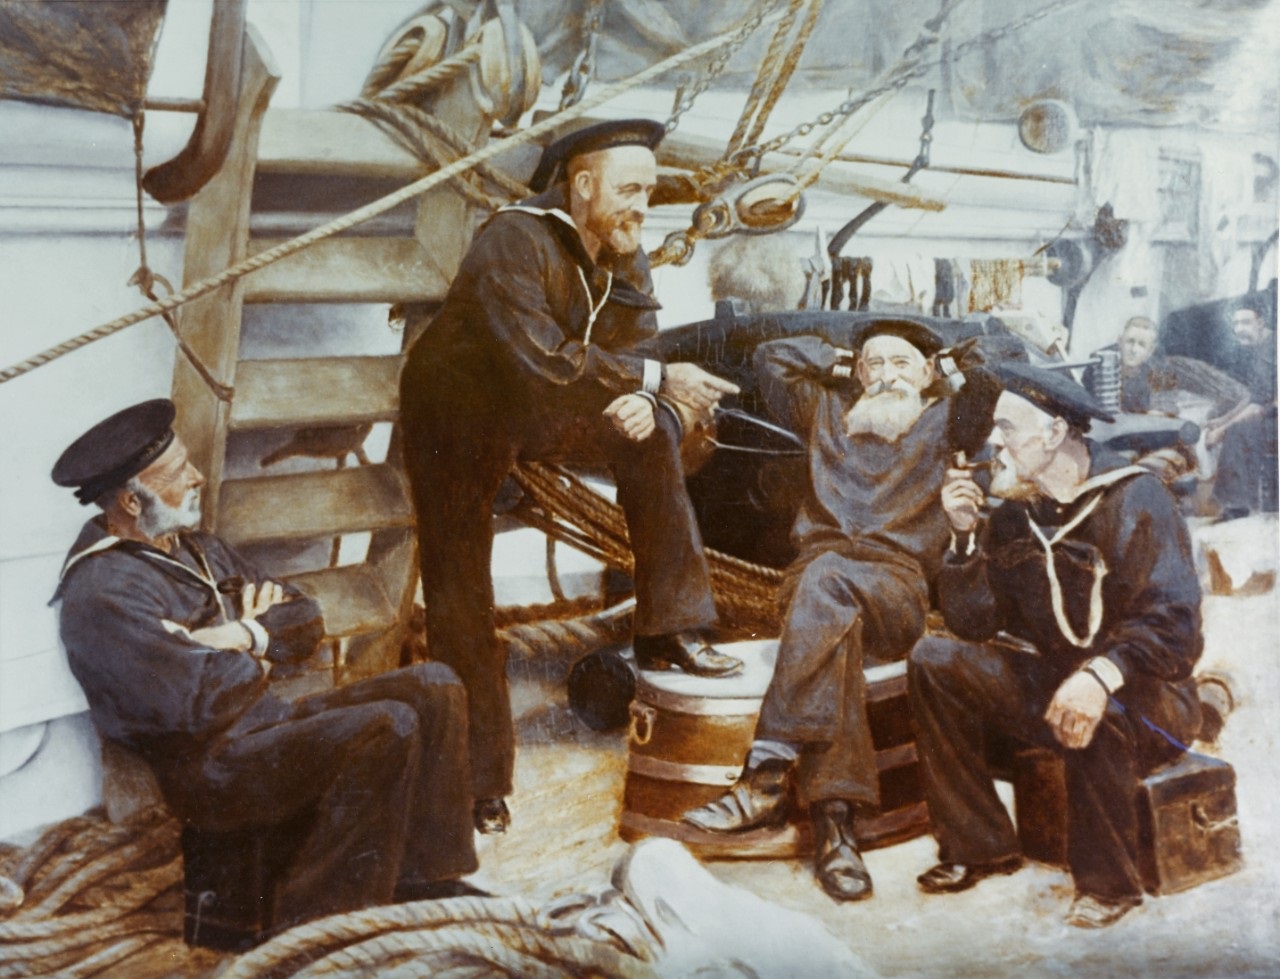 A sailor spinning sea yarns with three mates on the deck of a ship.